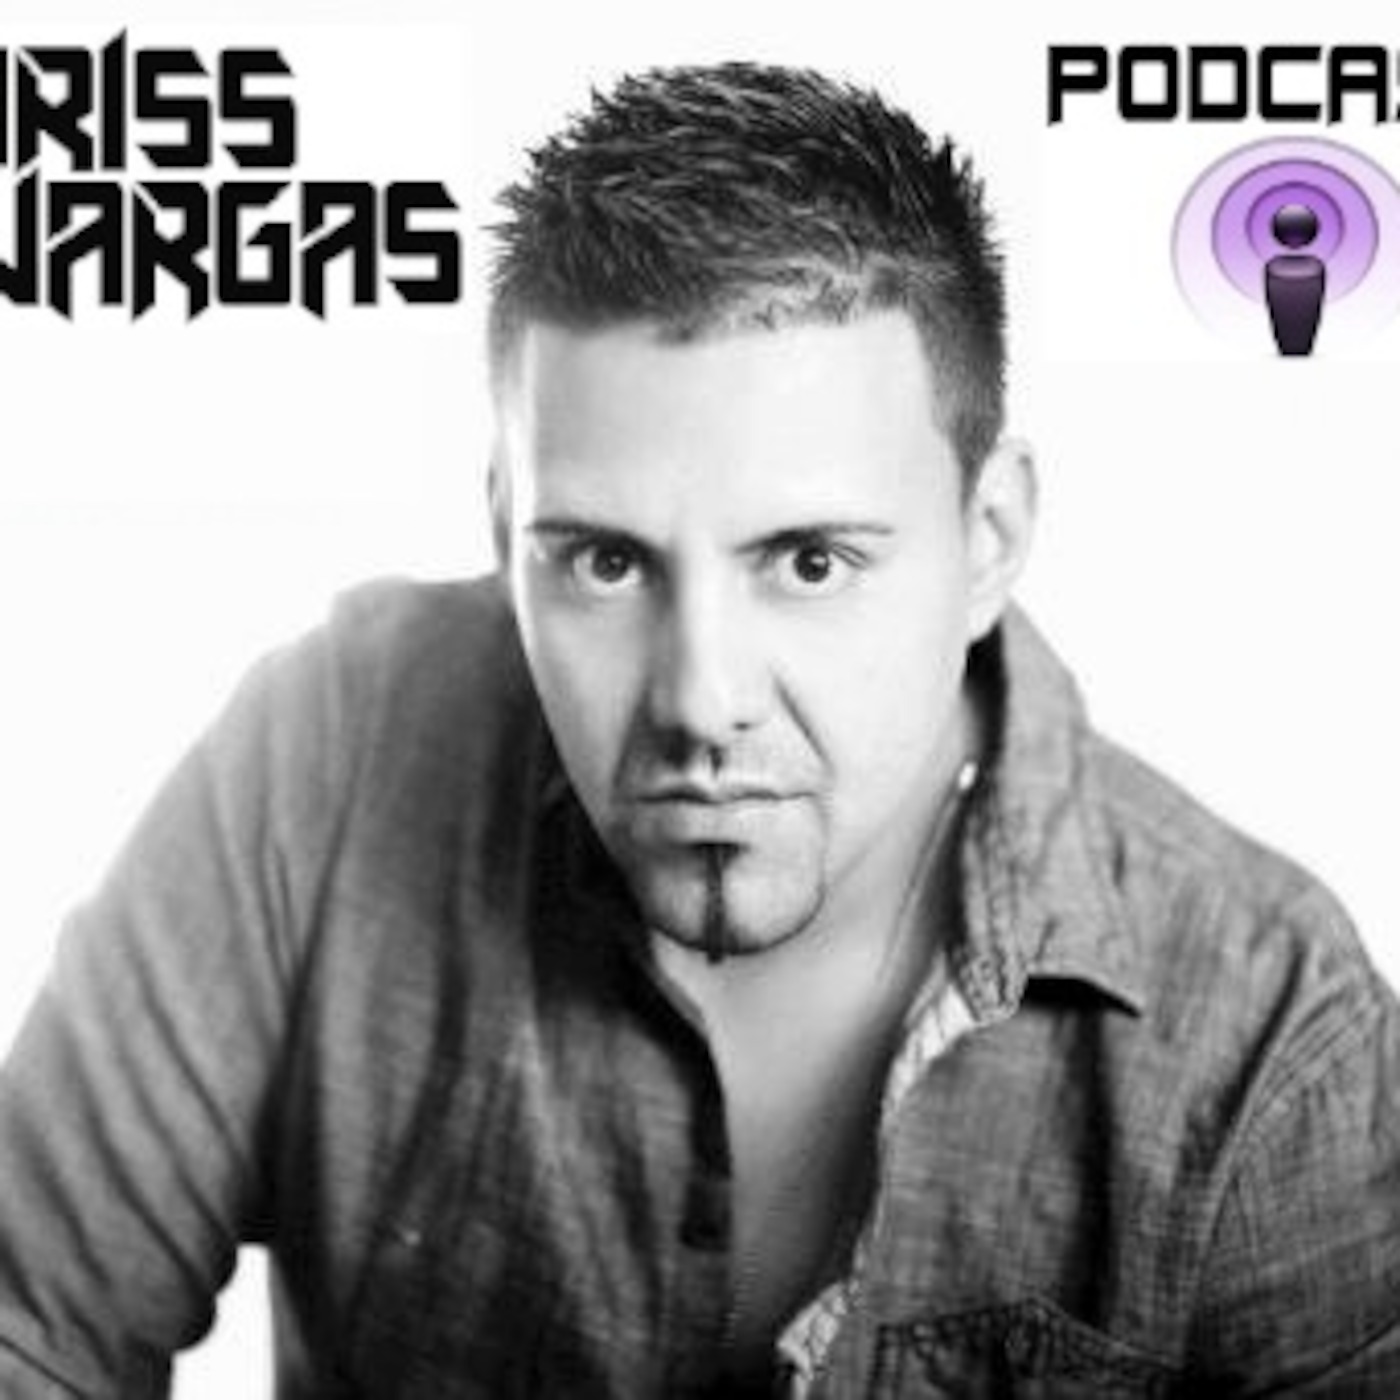 CHRISS VARGAS PODCASTS